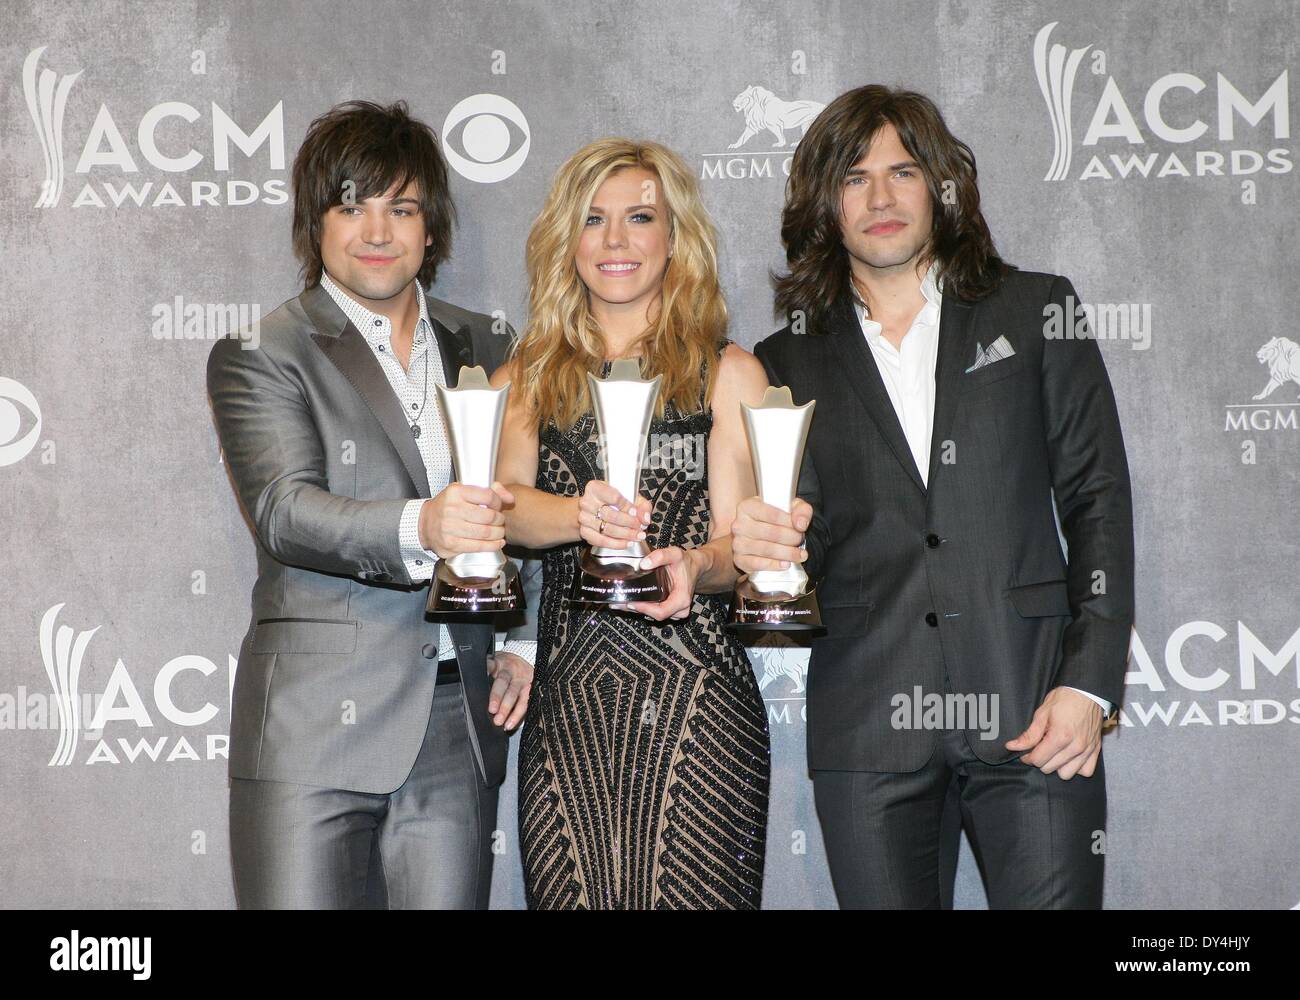 Los Angeles, CA, USA. 6. April 2014. Neil Perry, Kimberly Perry, Reid Perry, The Band Perry im Presseraum für 49th Annual Academy of Country Music (ACM) Awards 2014 - Press Room, MGM Grand Garden Arena, Los Angeles, CA 6. April 2014. Bildnachweis: James Atoa/Everett Collection/Alamy Live-Nachrichten Stockfoto